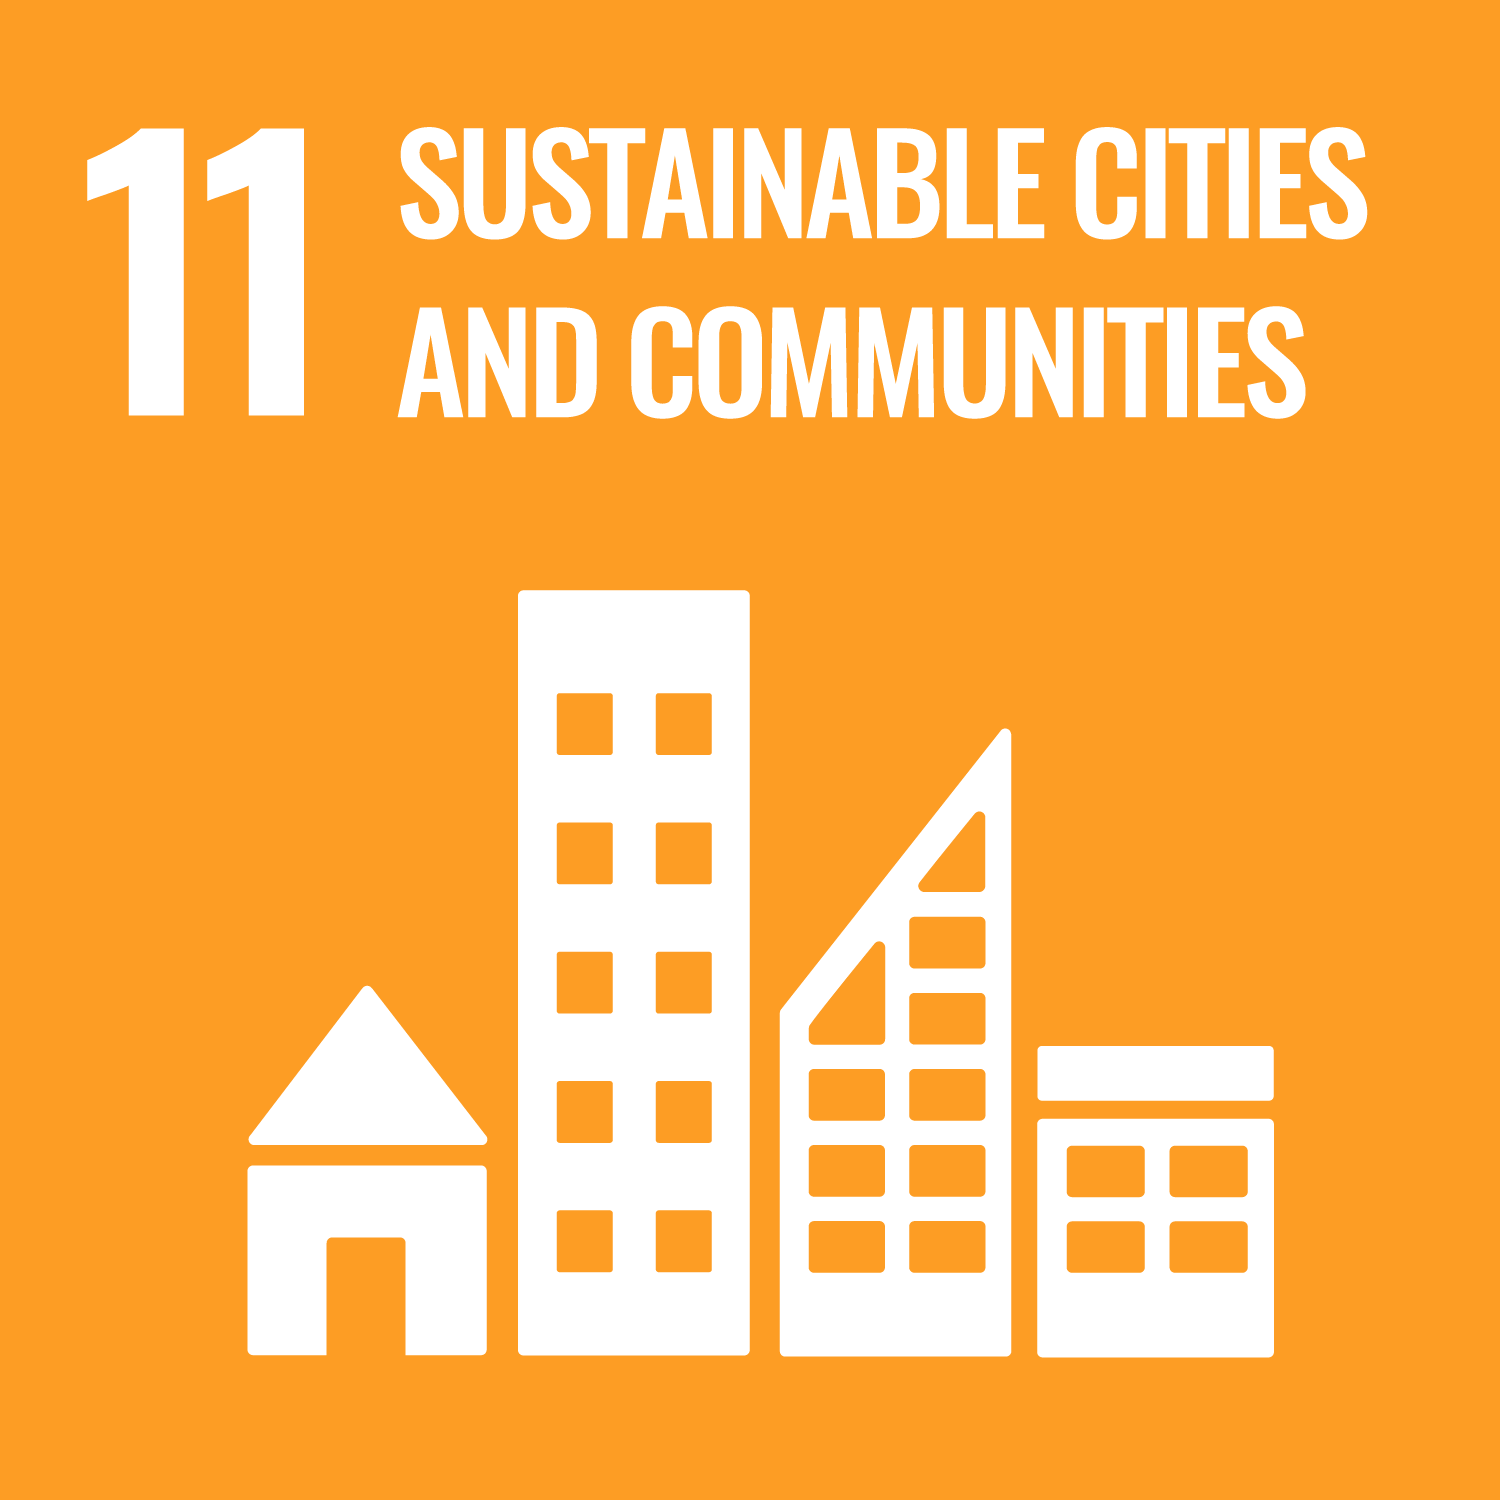 UNSDG-11 - Sustainable cities and communities